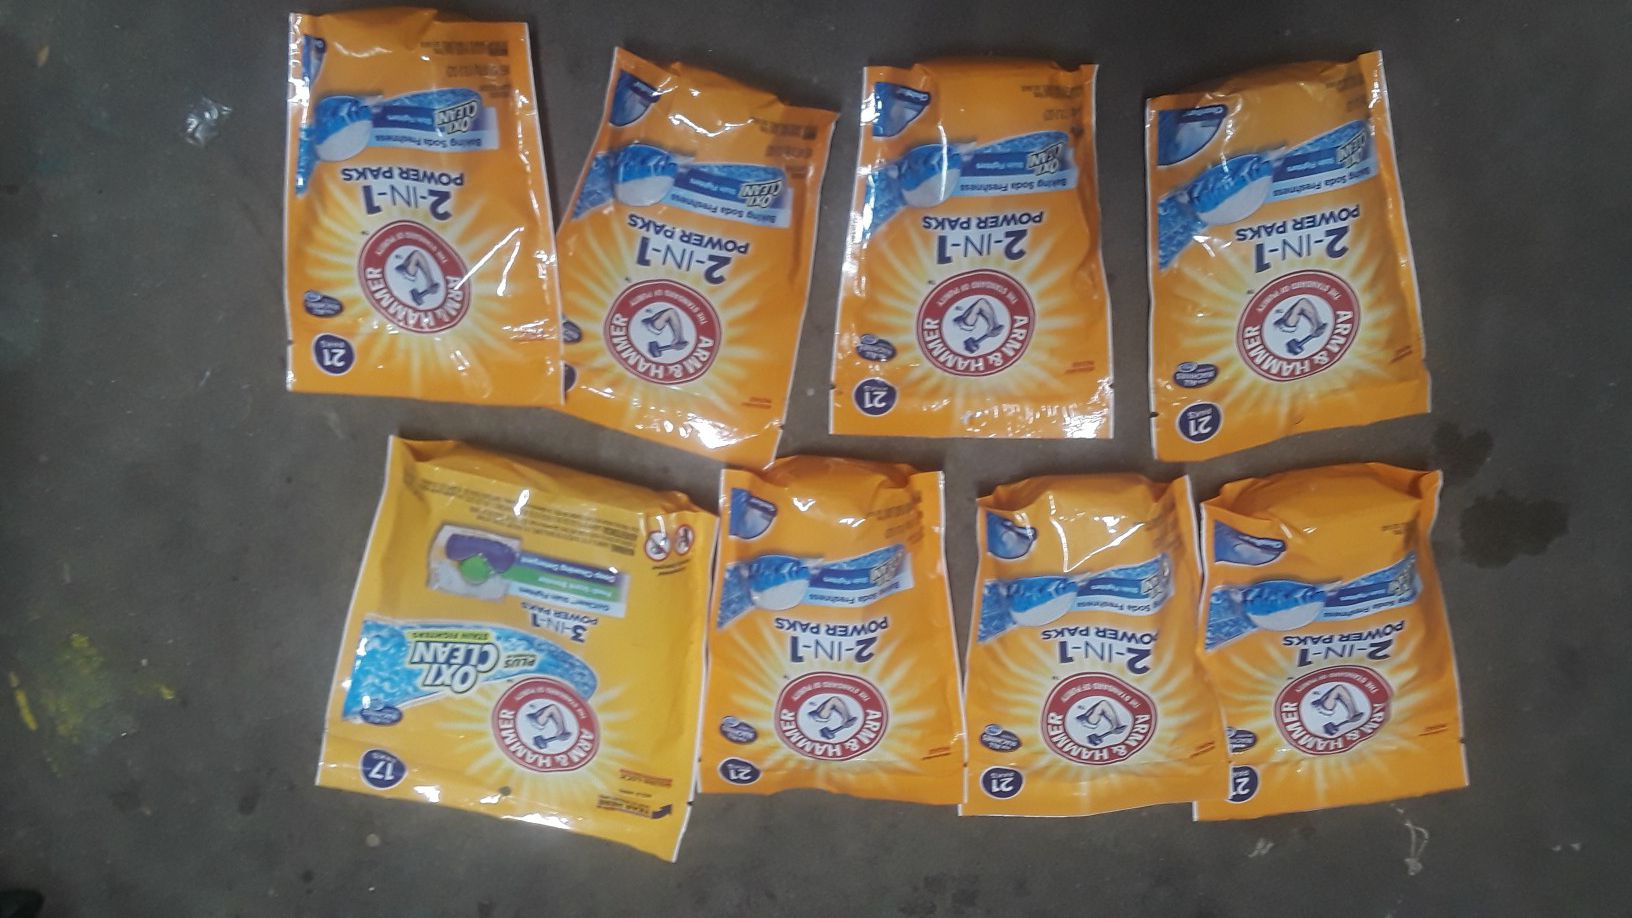 Arm and hammer Power packs